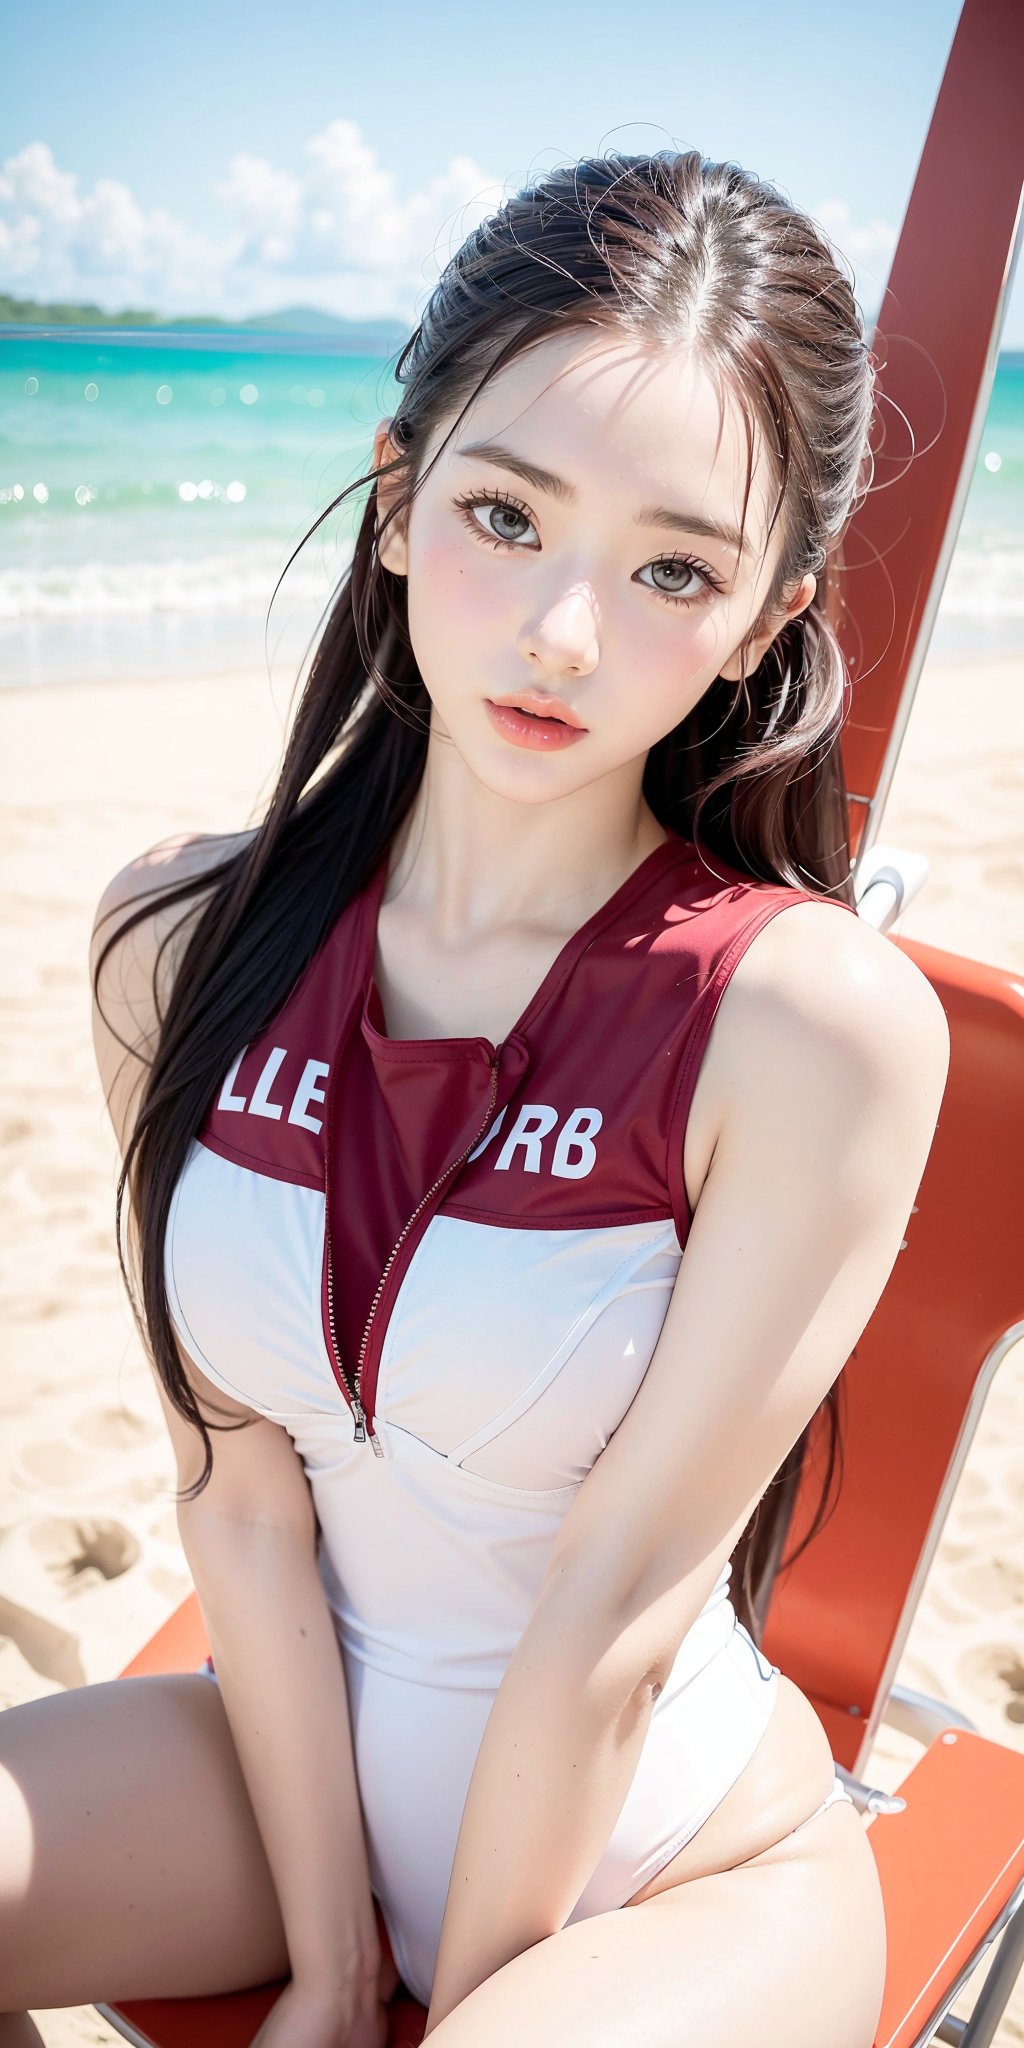 masterpiece, best quality, aesthetic, beautiful details, perfect focus, uniform 8K UHD wallpaper, high resolution, detailed texture, (perfect eyes, perfect anatomy, perfect face, perfectly drawn face, detailed face, detailed body):1.5, (A lifeguard girl, 24 years old, Korean girl, beauty, lifeguard outfit, lifeguard swimsuit,(( lifeguard jacket)), red_clothes, very_long_hair, high_ponytail):2.0, beach, scenery, (sitting on lifeguard chair, lifeguard_chair):2.5, "LIFEGUARD", 'RED CROSS' printed, lifeguard vests,